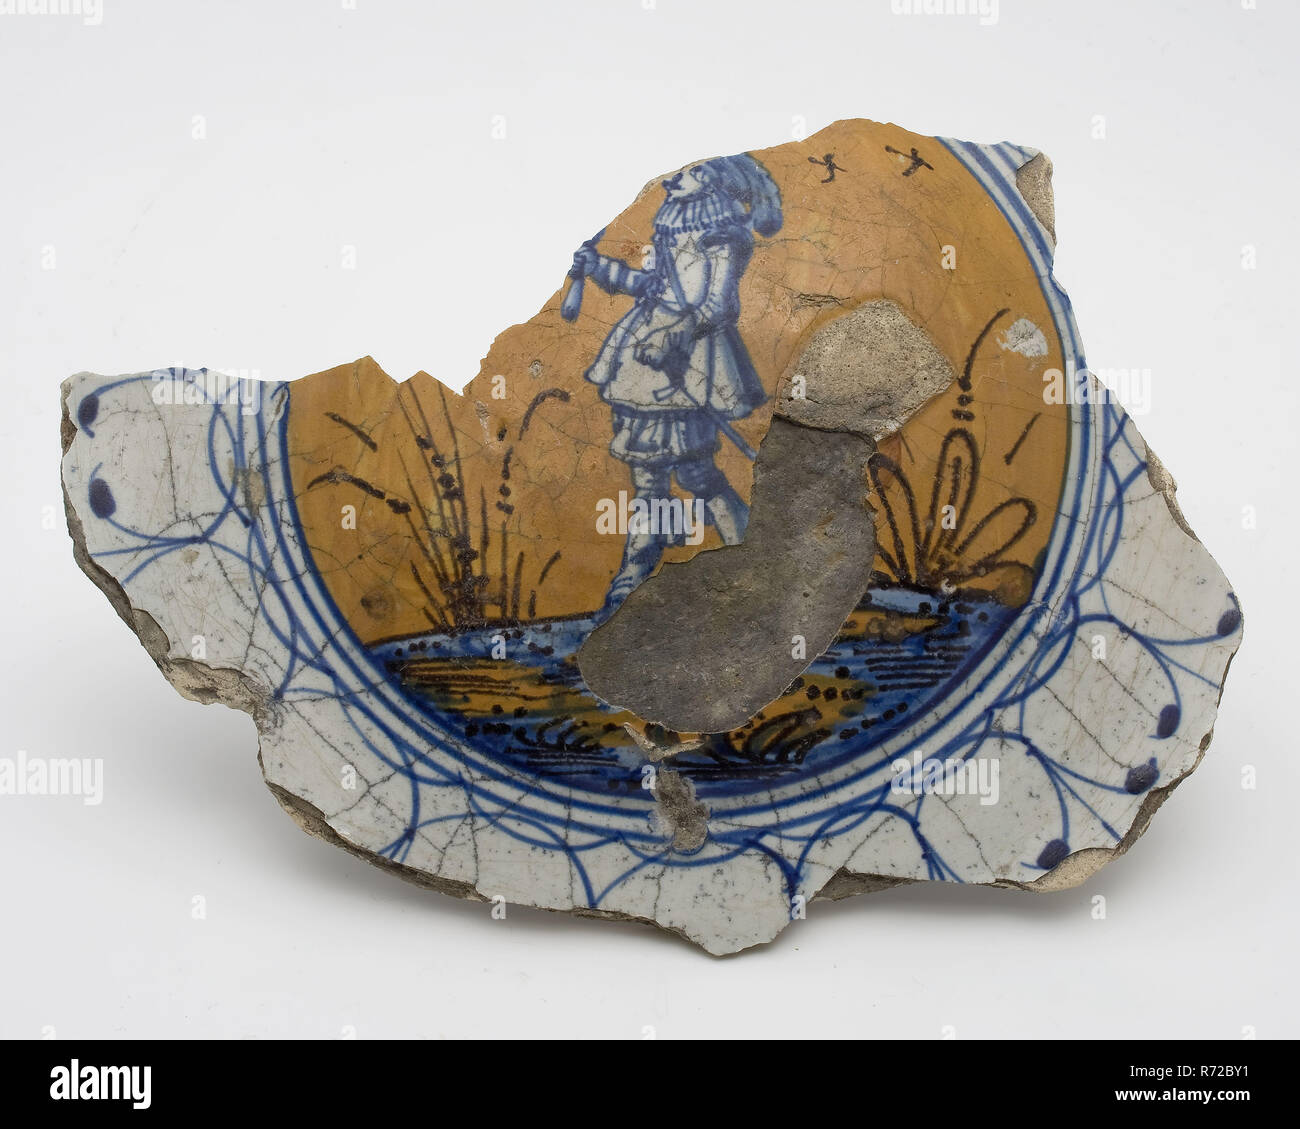 Majolica dish fragment, man in rich clothing, polychrome, pancake dish, dish crockery holder soil find ceramic pottery glaze tin glaze lead glaze, majolica shaped baked painted fried Fragment of pancake dish. Fried on prunes Yellow shard scraped earthenware. Depicted is man or soldier in rich clothes on an orange and blue ground. Serious baking fault in the middle but no misbaksel: many scratches in the glaze indicate domestic use archeology Rotterdam decorate interior serve serve food Italy archaeological find in the soil Rotterdam 1941. Stock Photo